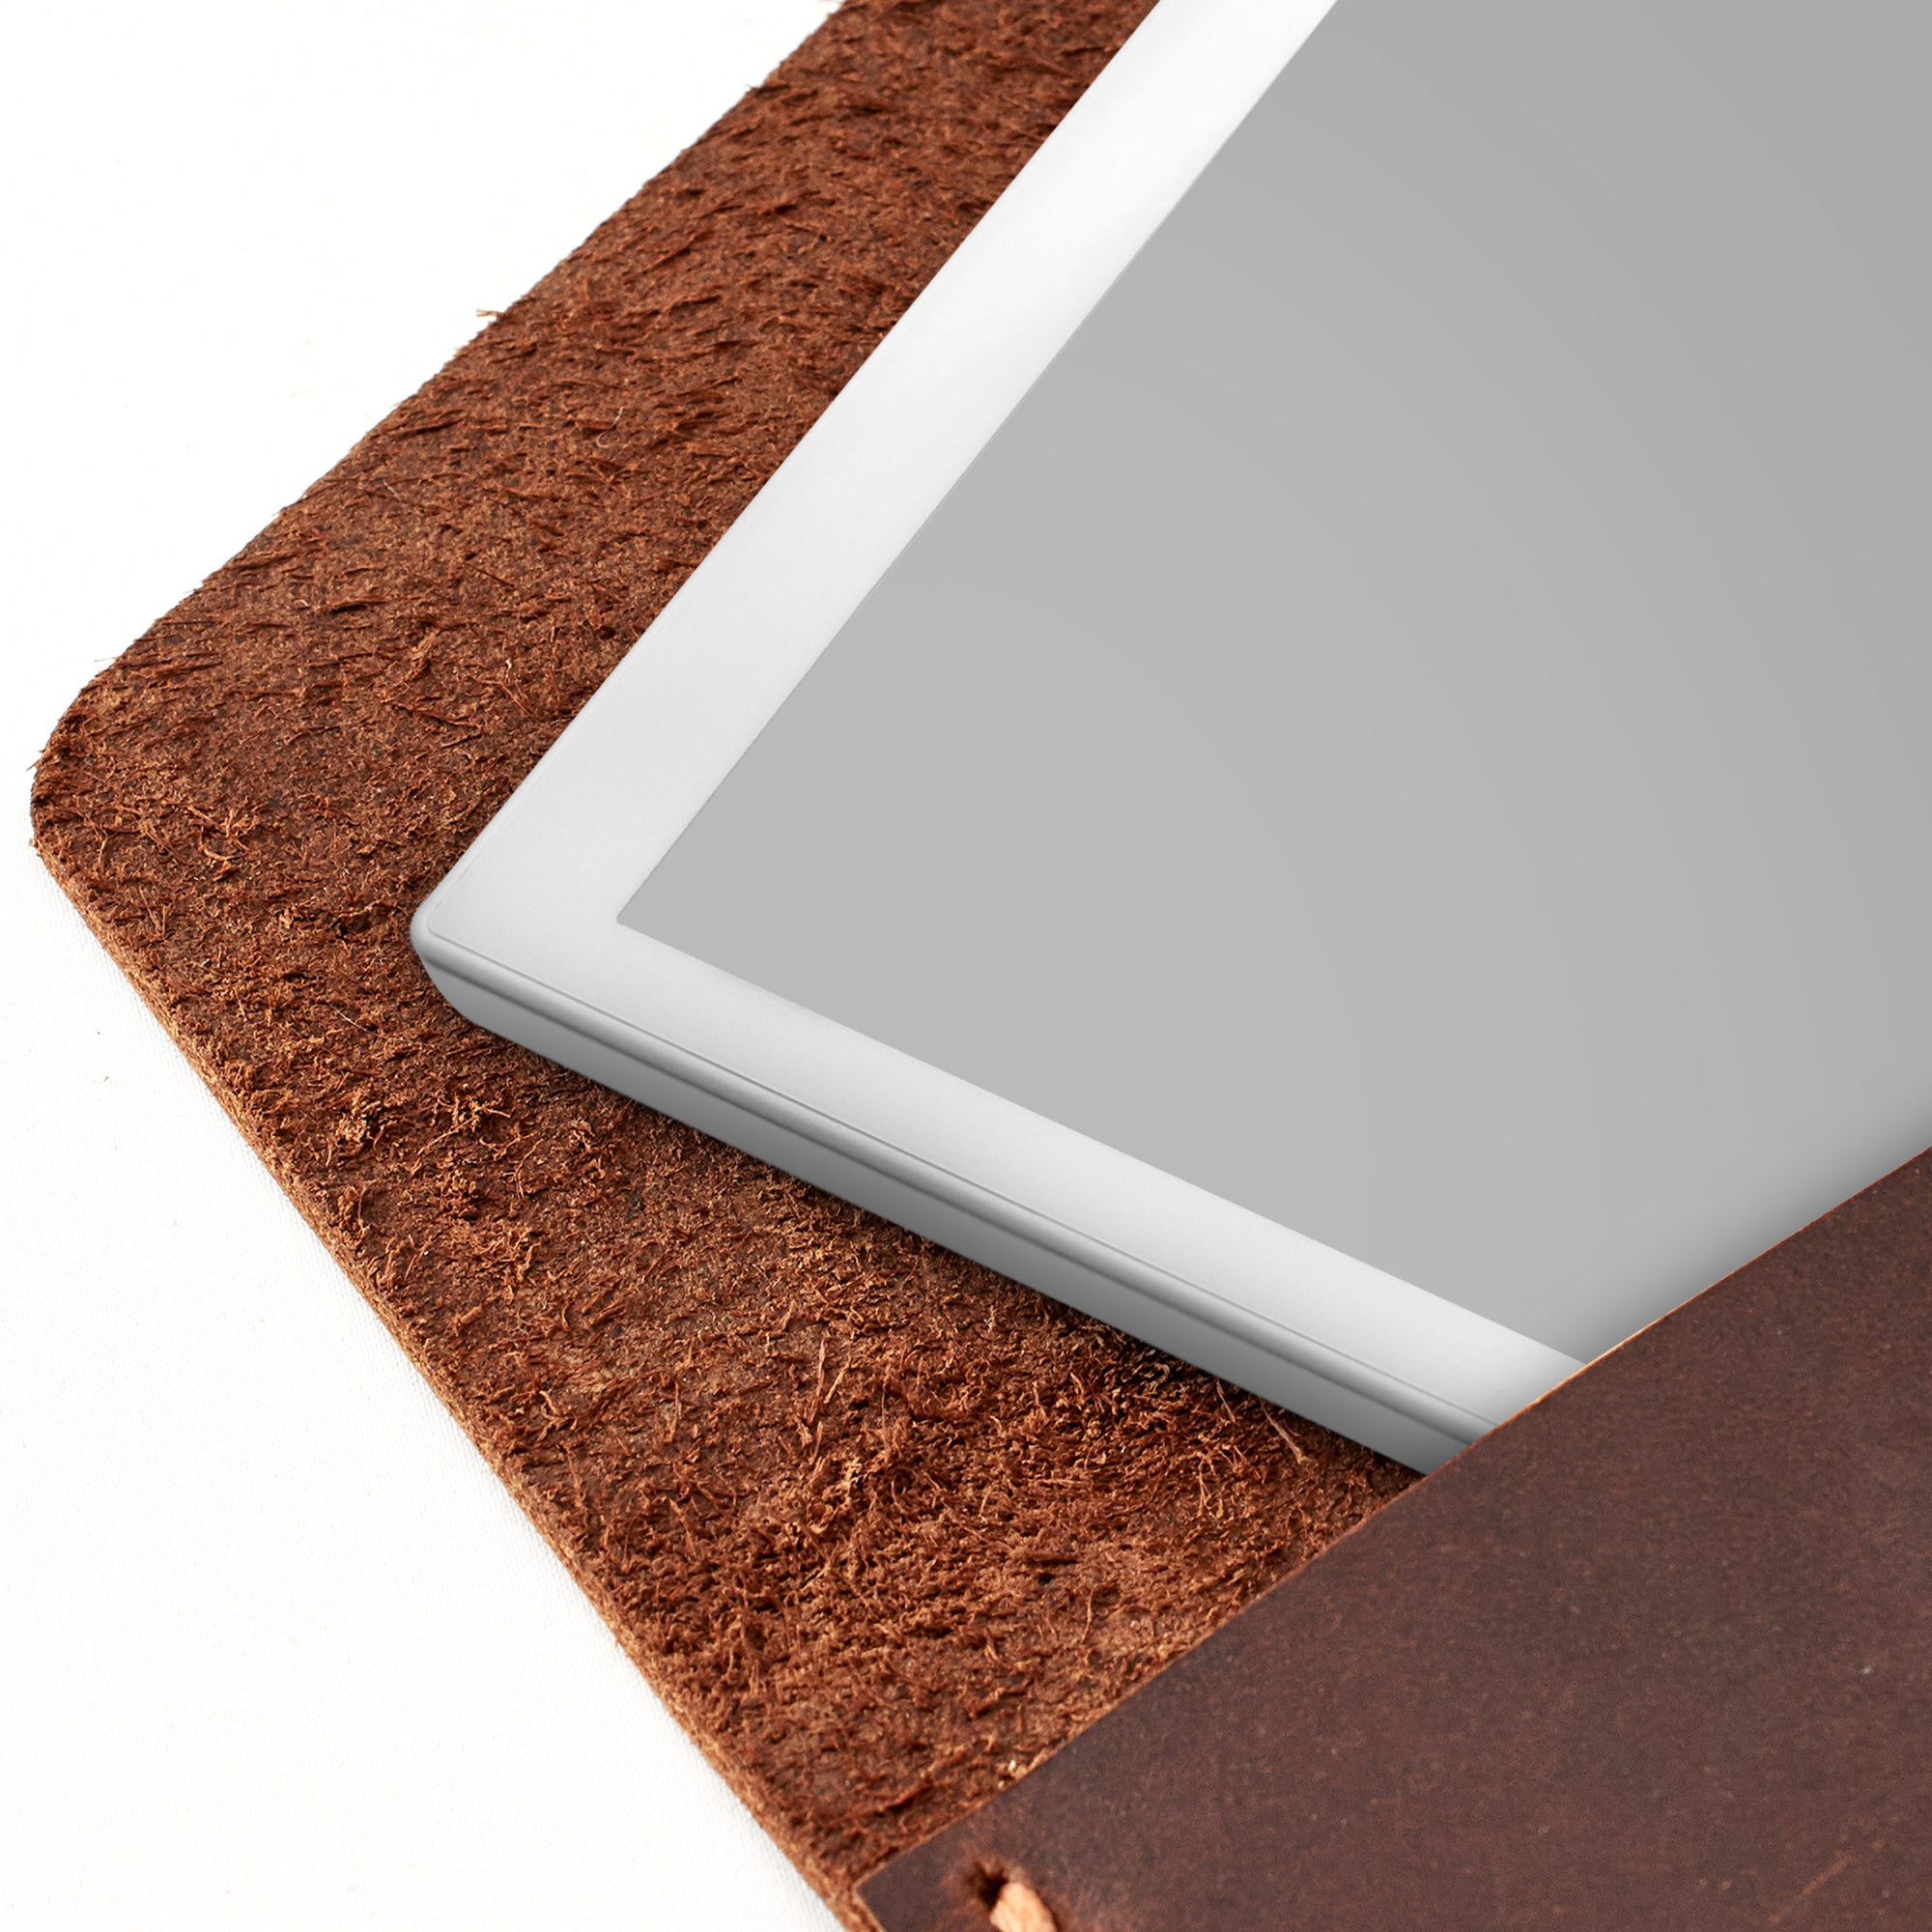 Soft interior. Tan brown handcrafted leather reMarkable tablet case. Folio with Marker holder. Paper E-ink tablet minimalist sleeve design. 